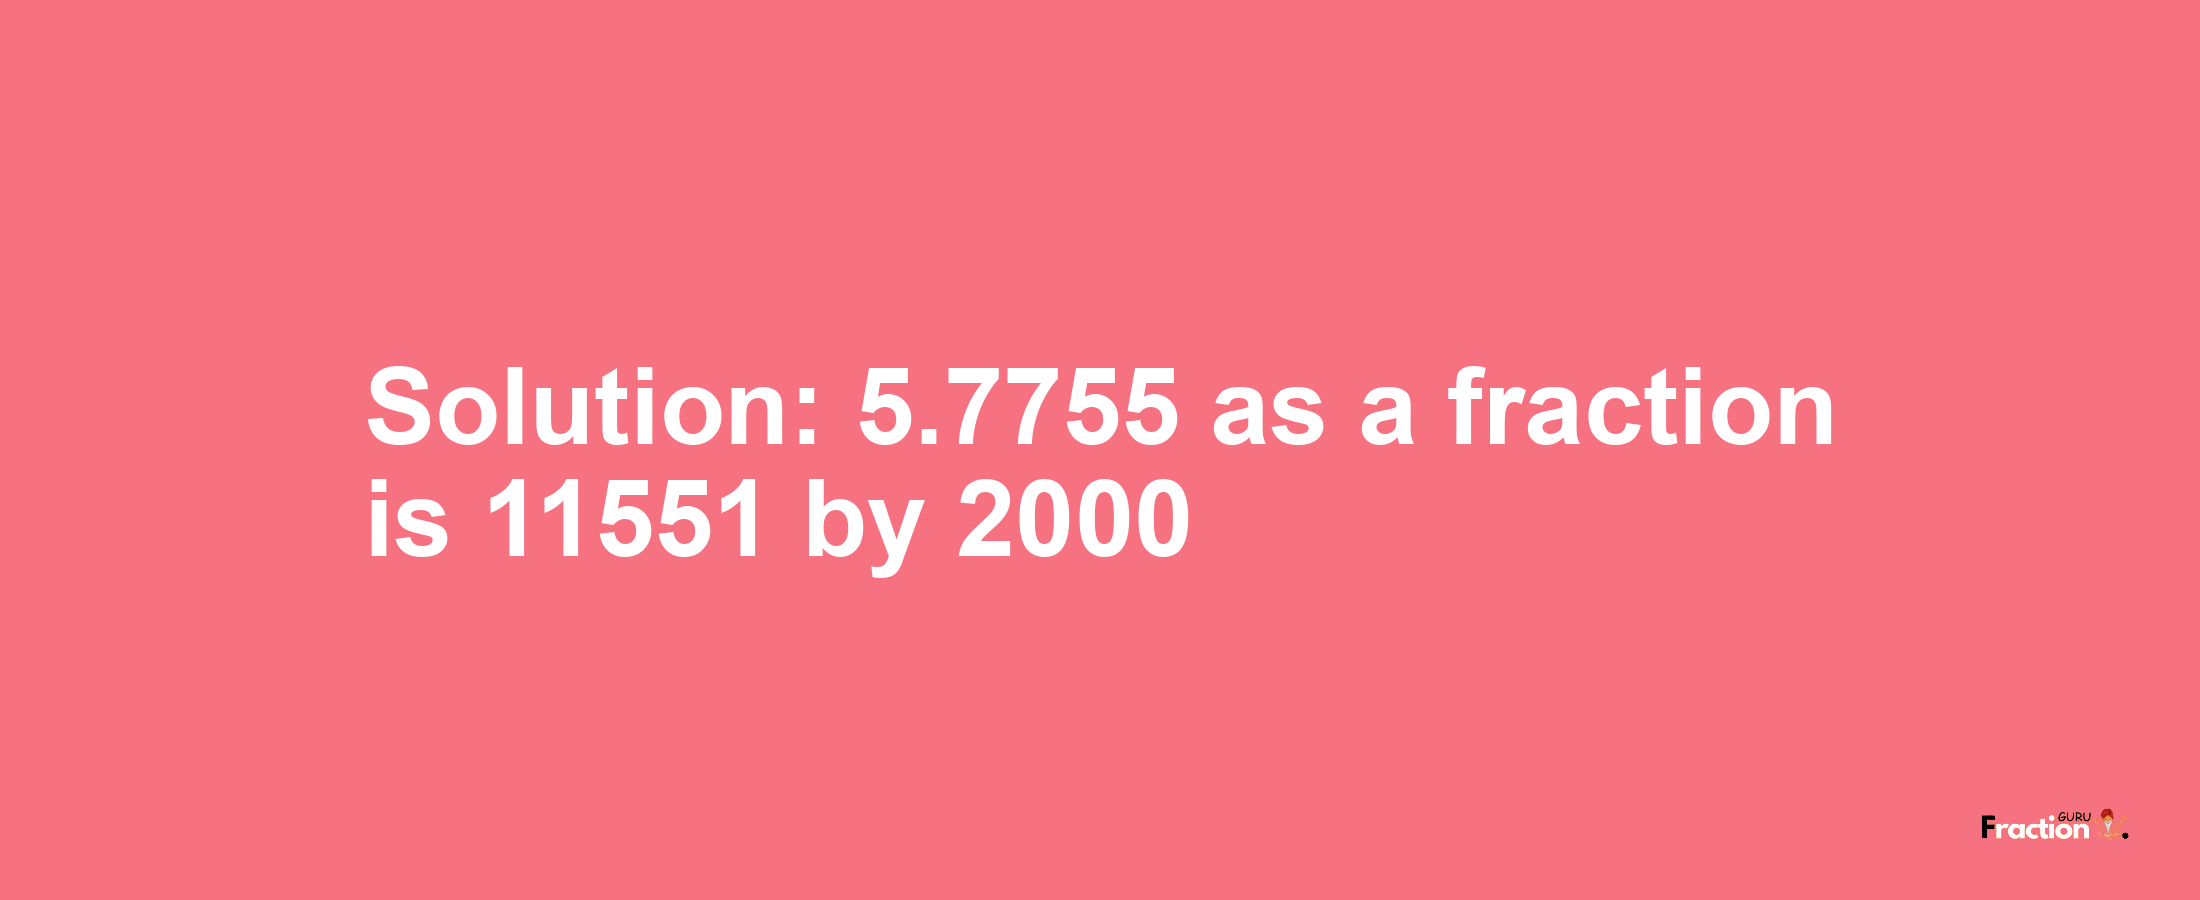 Solution:5.7755 as a fraction is 11551/2000